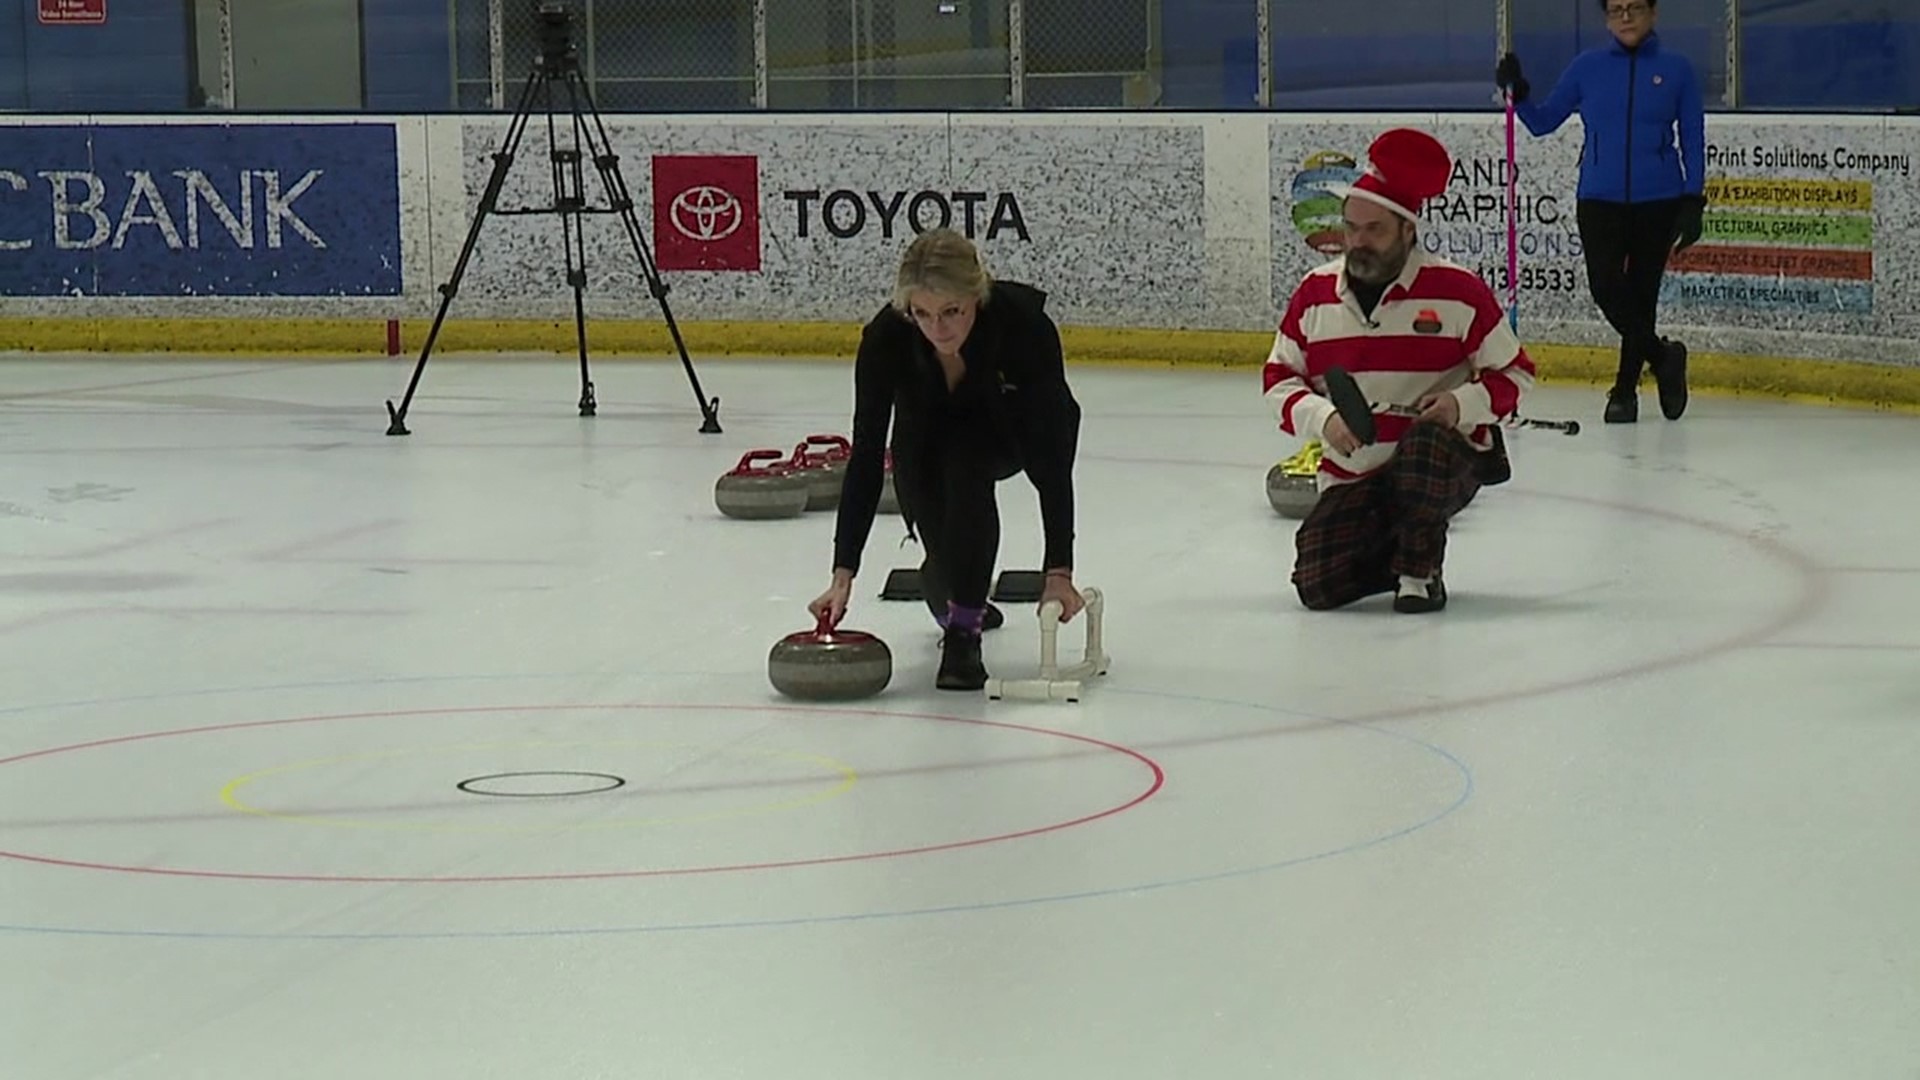 Skip, curl, and sweep! Newswatch 16's Chelsea Strub hits the ice with the Anthracite Curling Club!